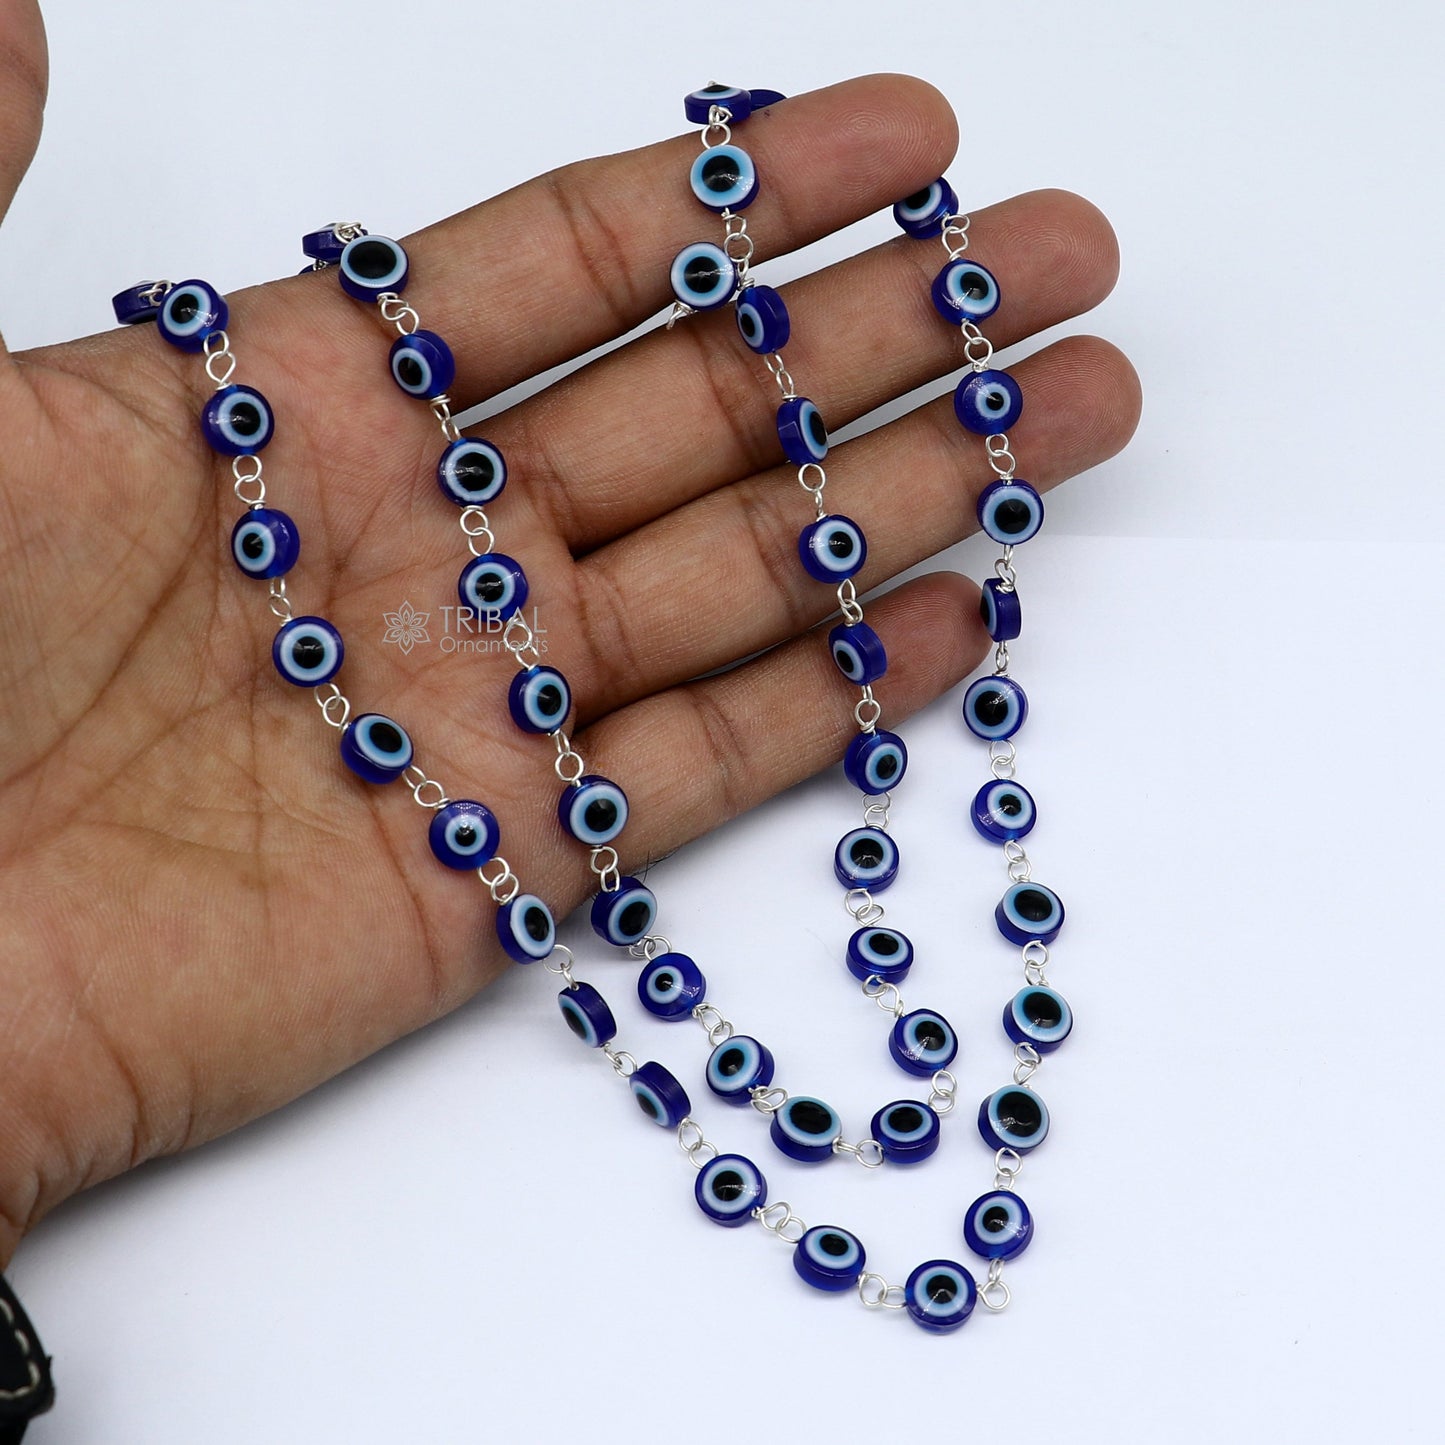 54 beads Jaap/ japa mala evil eyes beads handmade necklace chain 925 silver chain necklace meditation necklace ch561 - TRIBAL ORNAMENTS